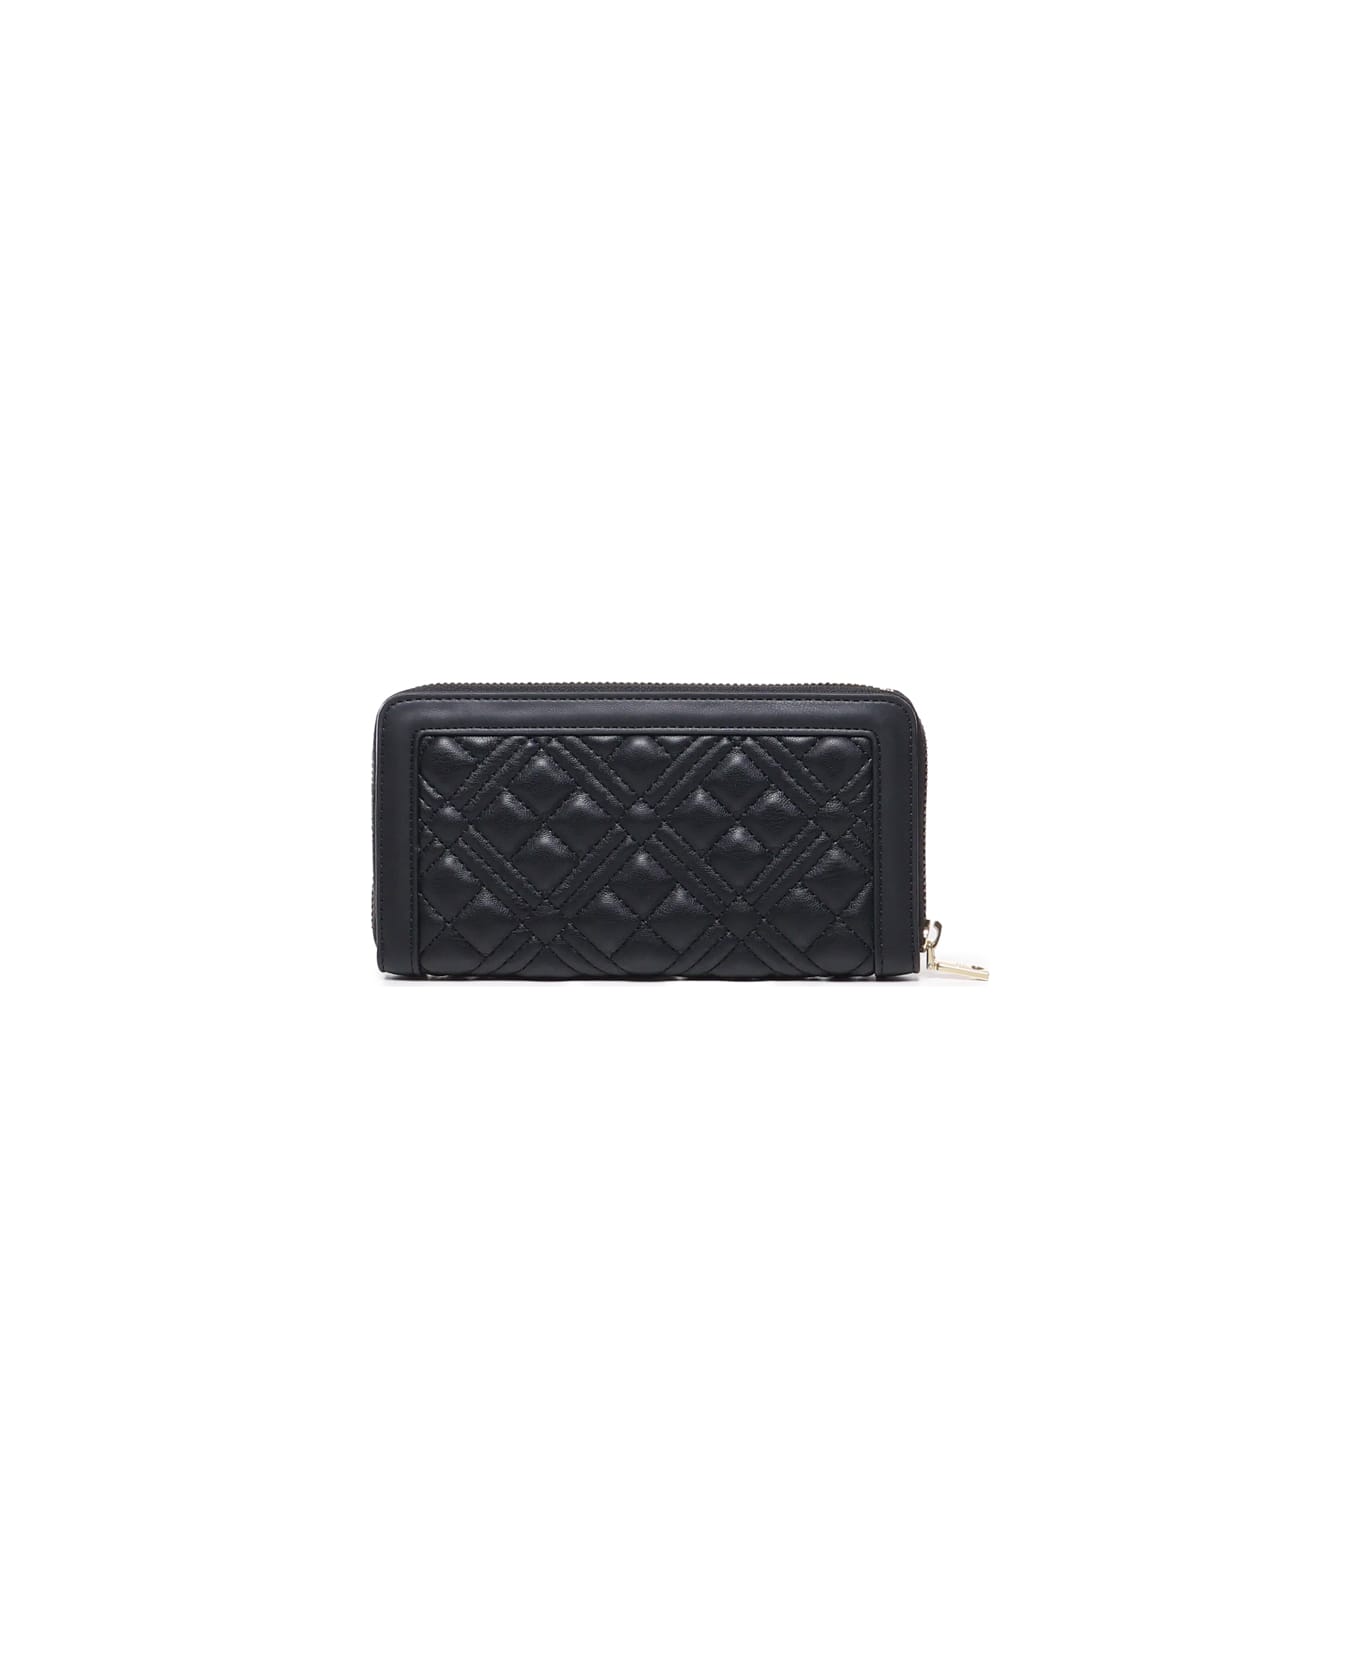 Love Moschino Wallet With Logo - Black